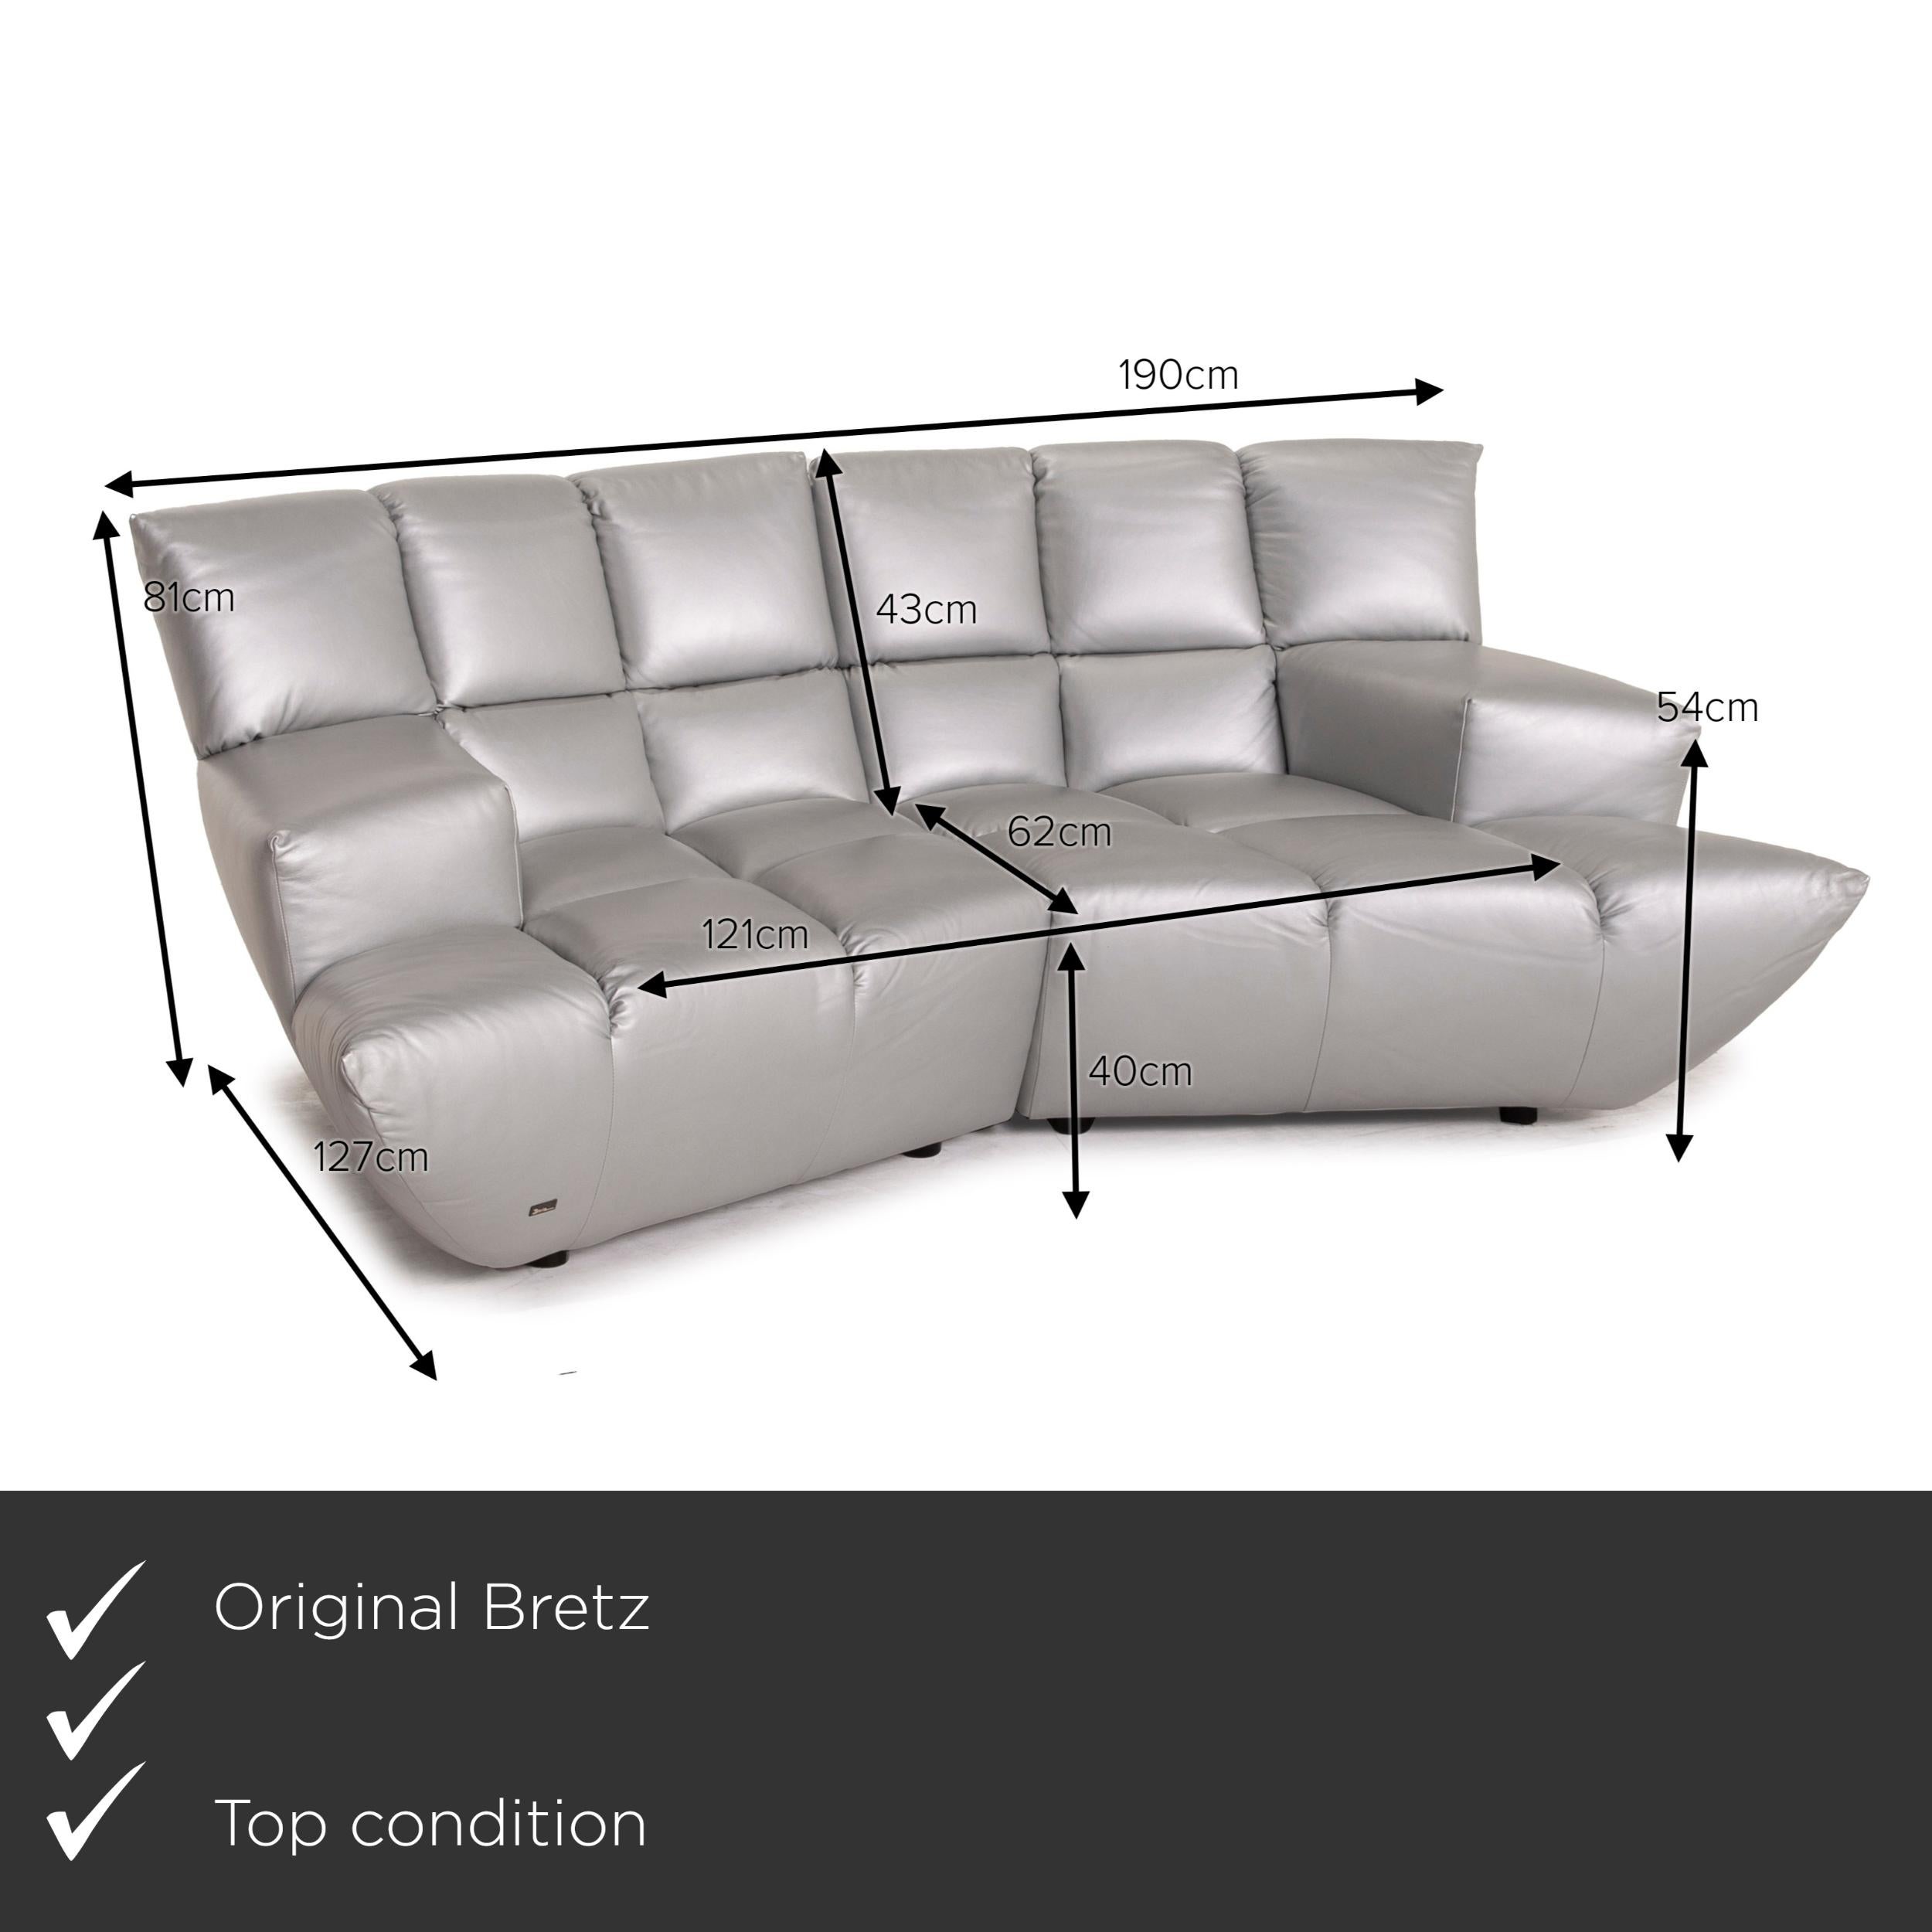 We present to you a Bretz Cloud 7 leather sofa silver.


 Product measurements in centimeters:
 

Depth: 127
Width: 190
Height: 81
Seat height: 40
Rest height: 54
Seat depth: 62
Seat width: 121
Back height: 43.
 